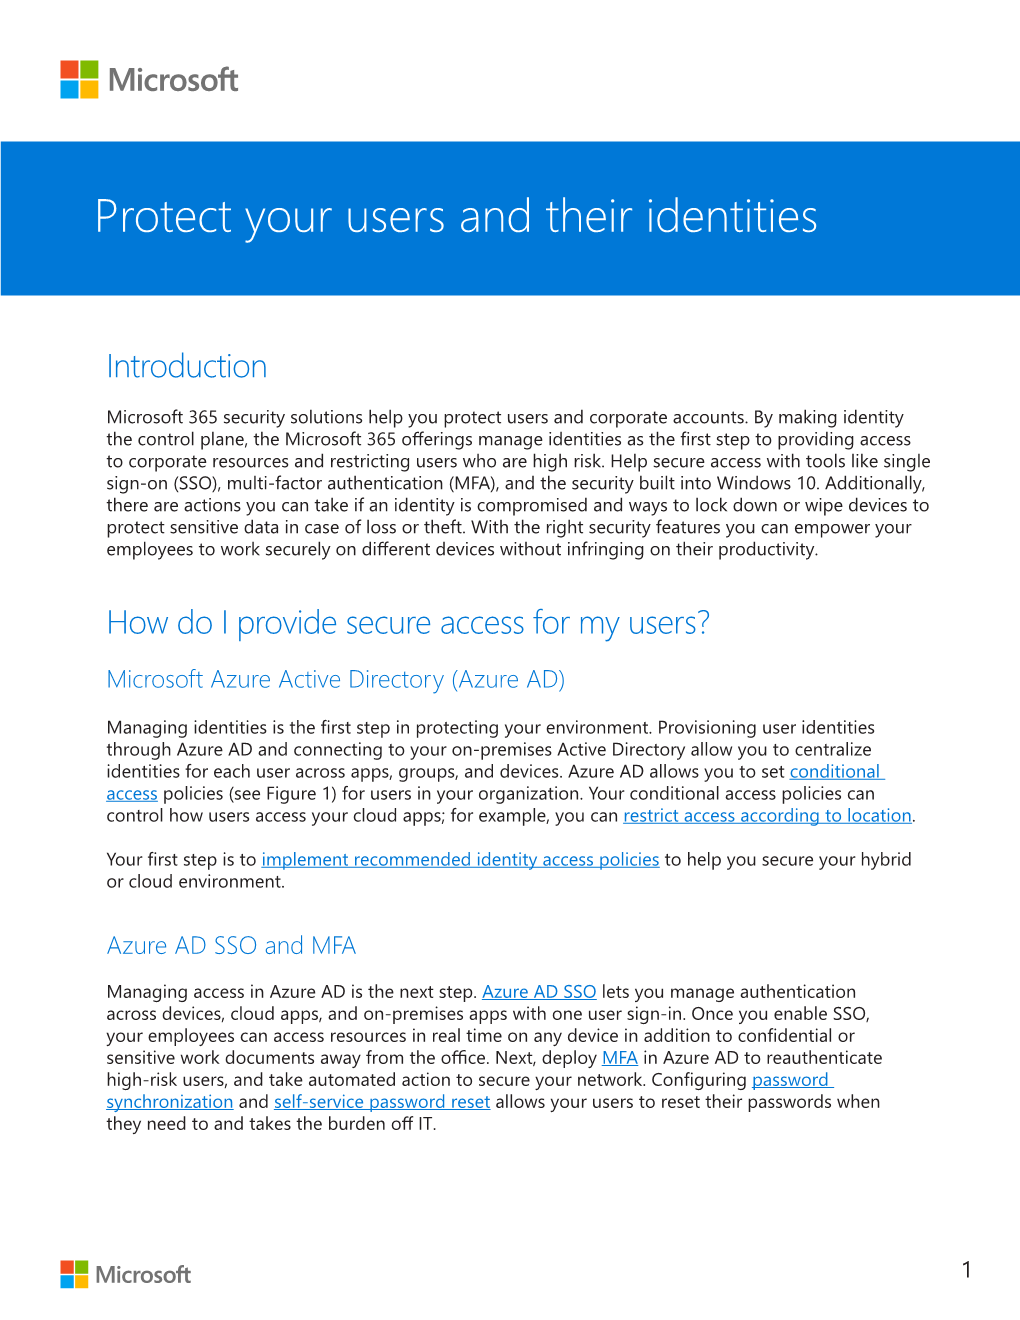 Protect Your Users and Their Identities